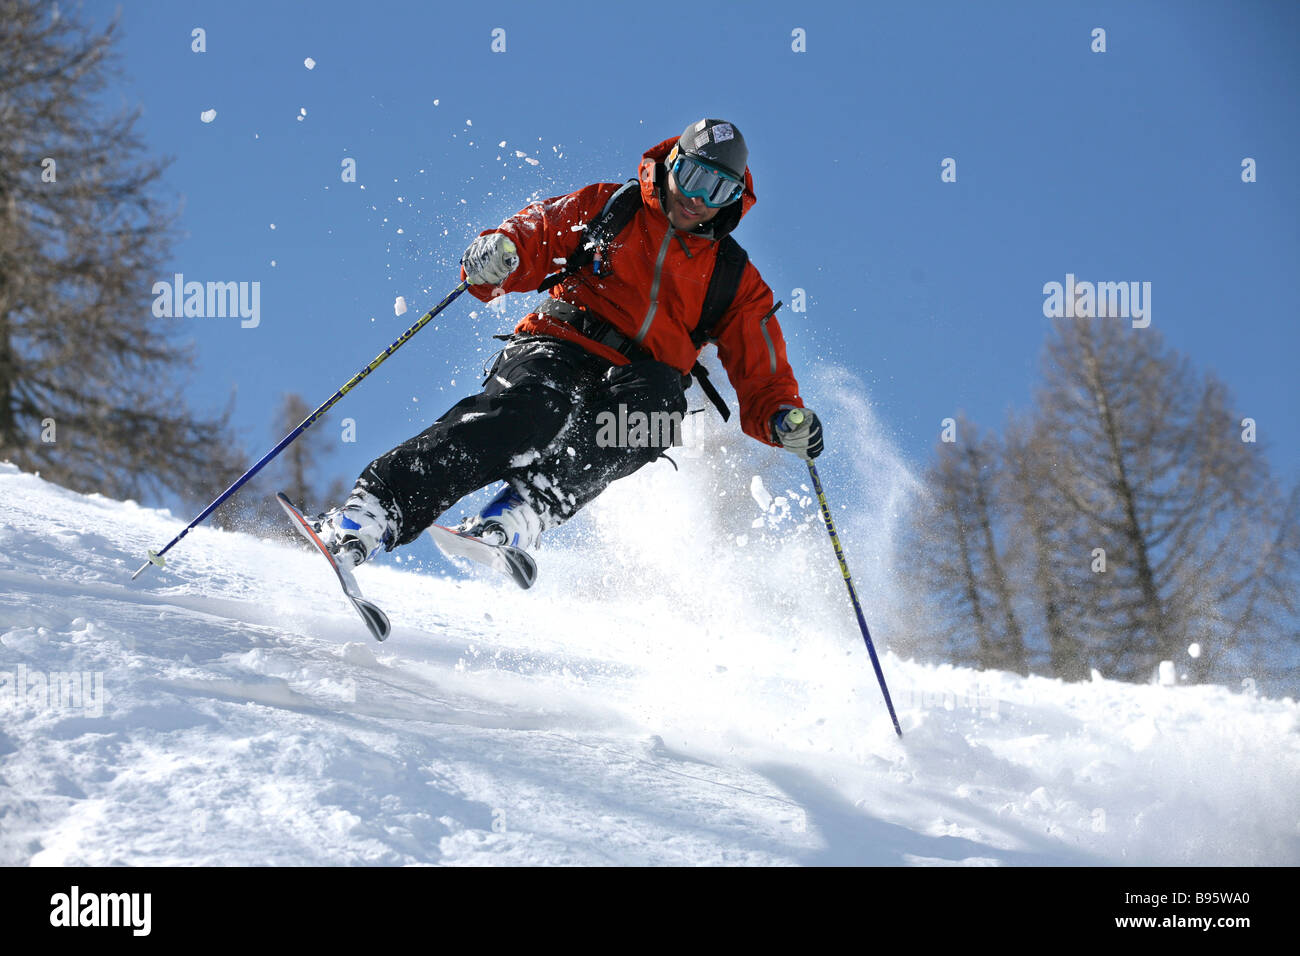 Male skier in red jacket hitting the powder snow Stock Photo